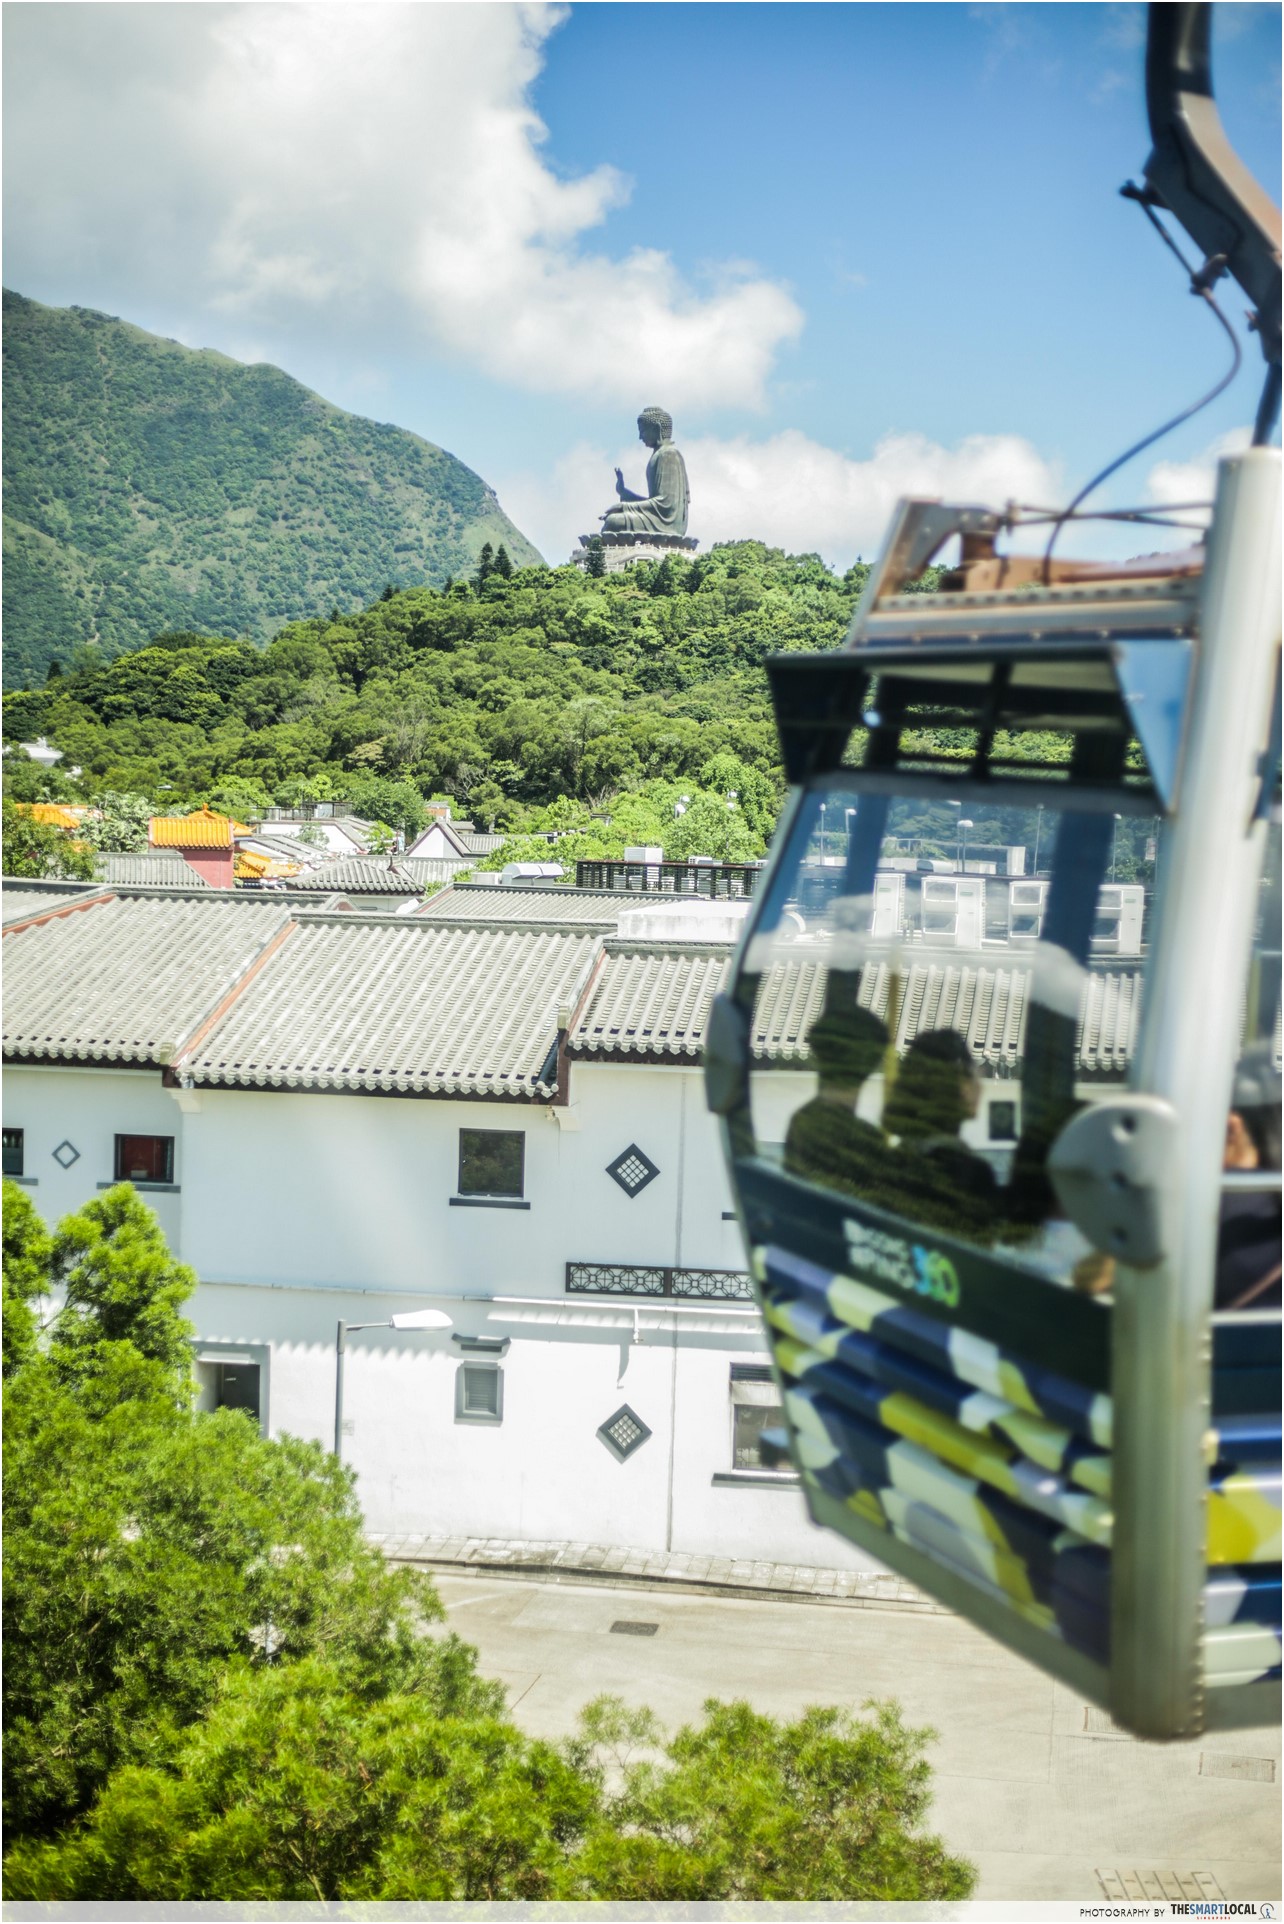 See the Big Buddha from the cable car